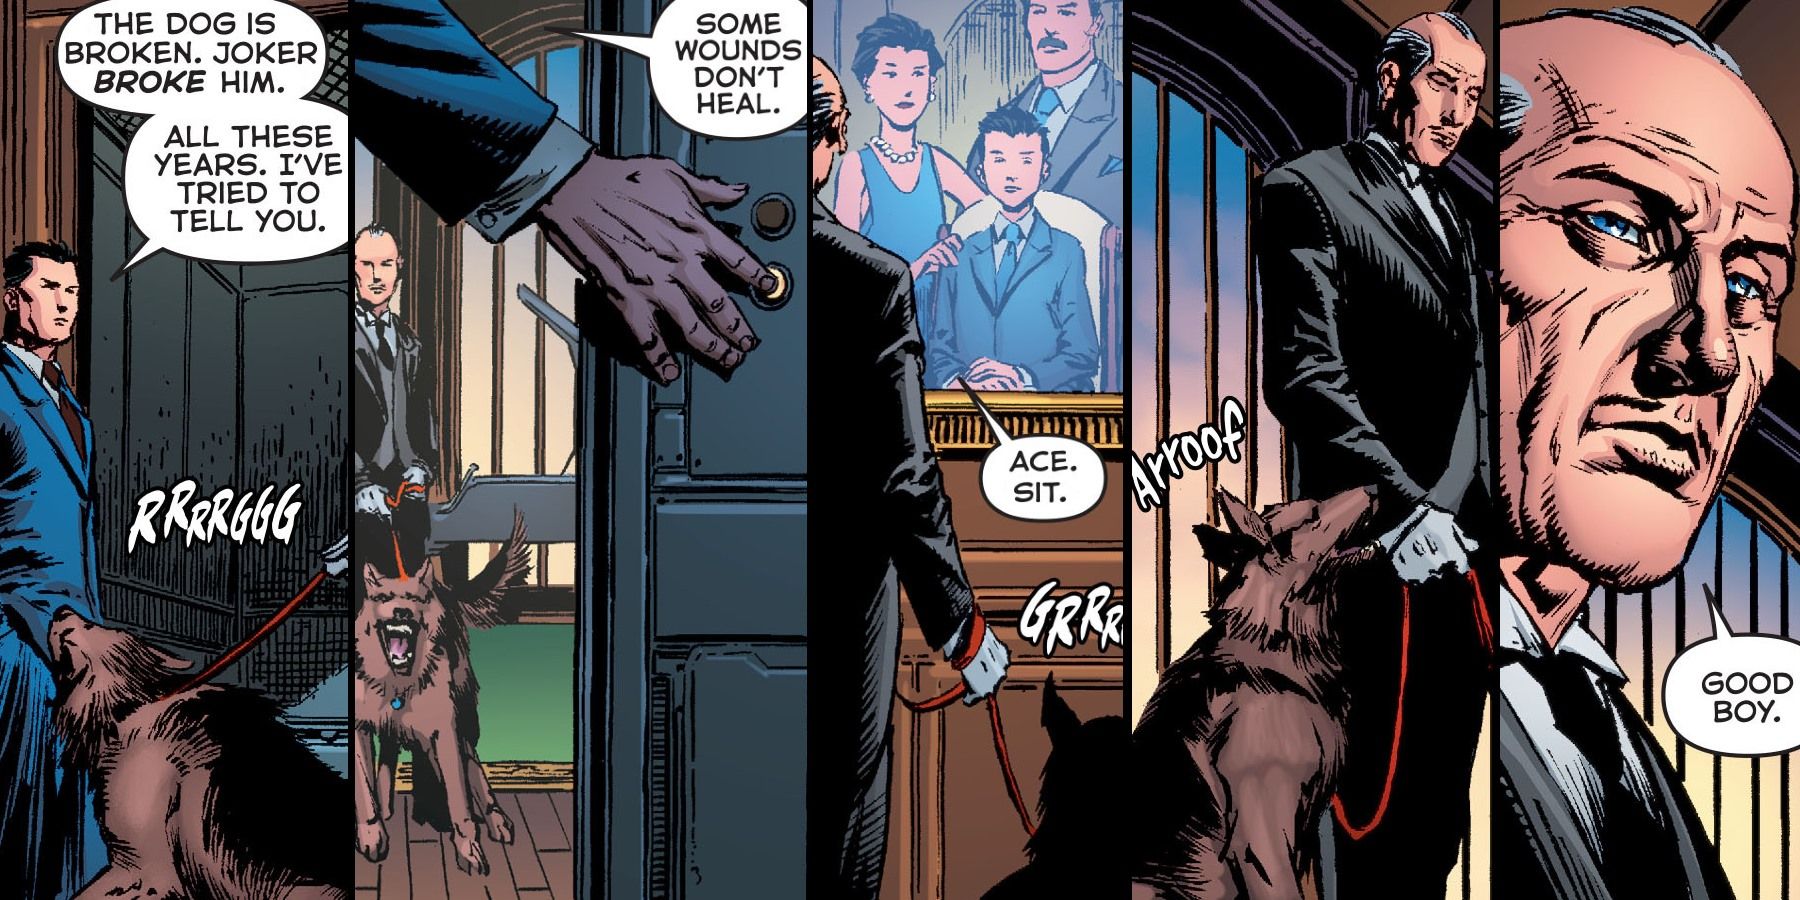 Bruce Wayne, Alfred, and Ace the Dog in DC Comics